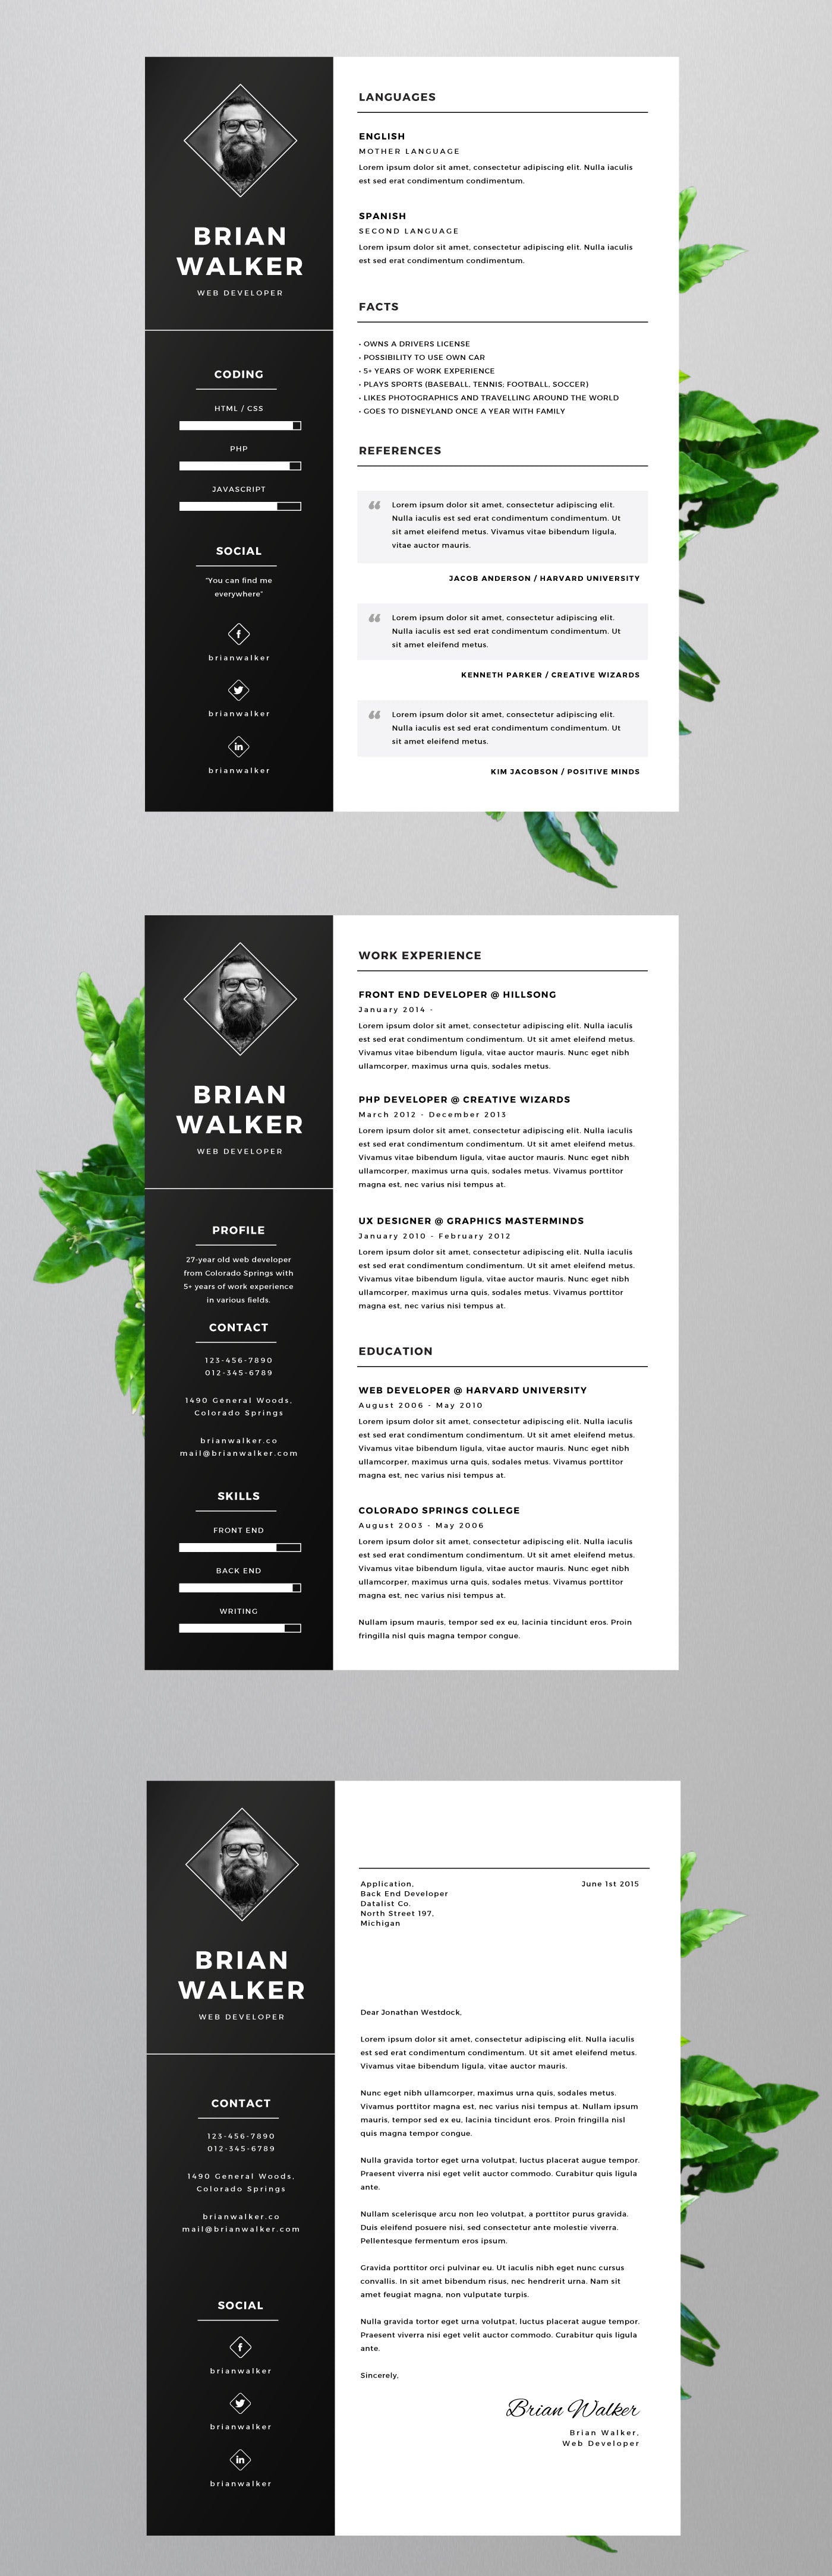 Free Clean Modern Minimal CV Resume Template in Photoshop (PSD), Illustrator (AI) and Microsoft Word (DOC, DOCX) Formats